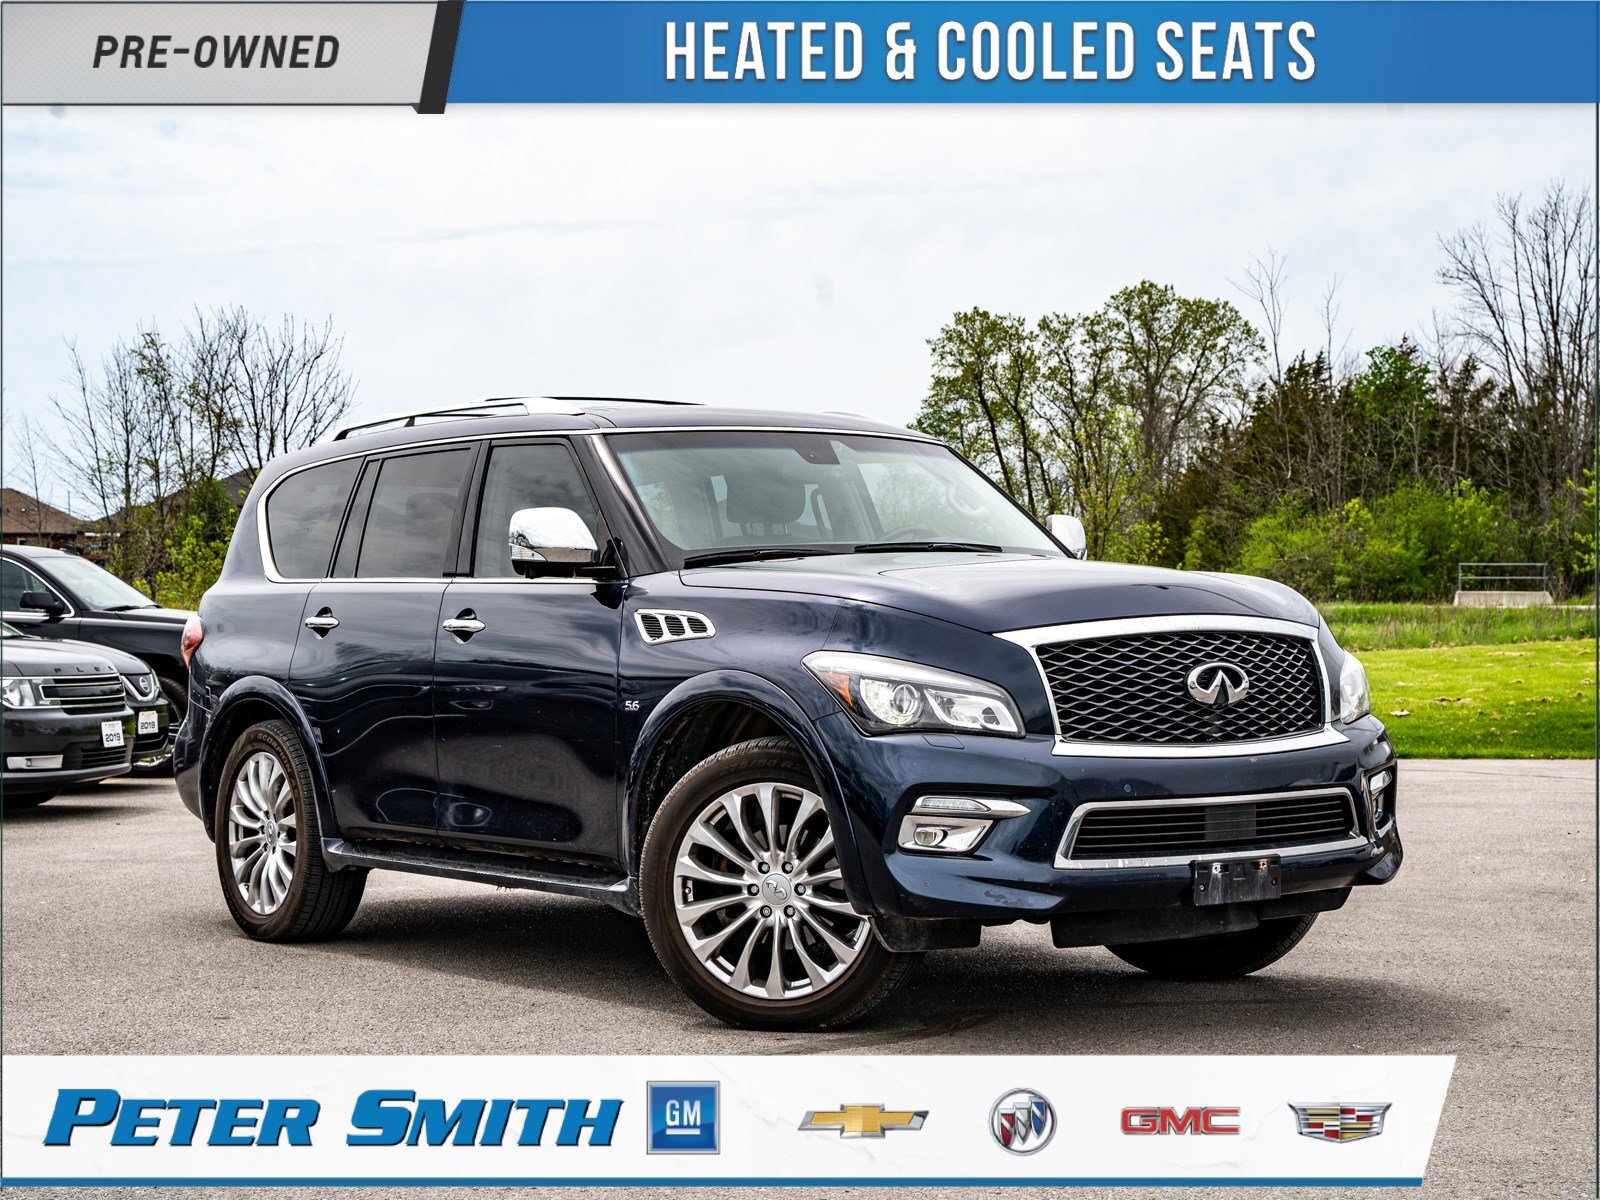 2015 Infiniti QX80 - Heated & Cooled Front Seats